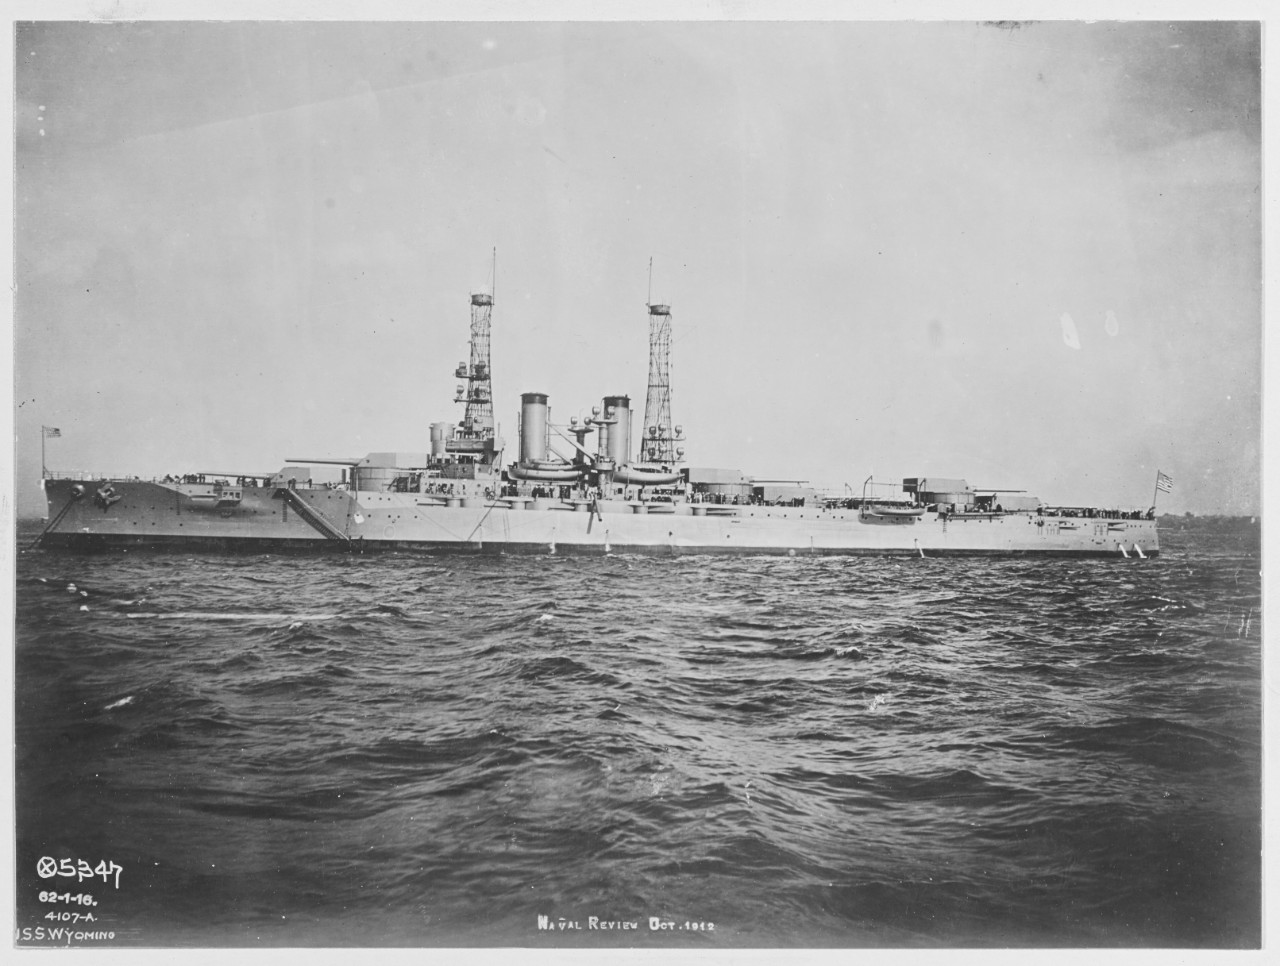 USS WYOMING (BB-32) at the Naval Review, October 1912